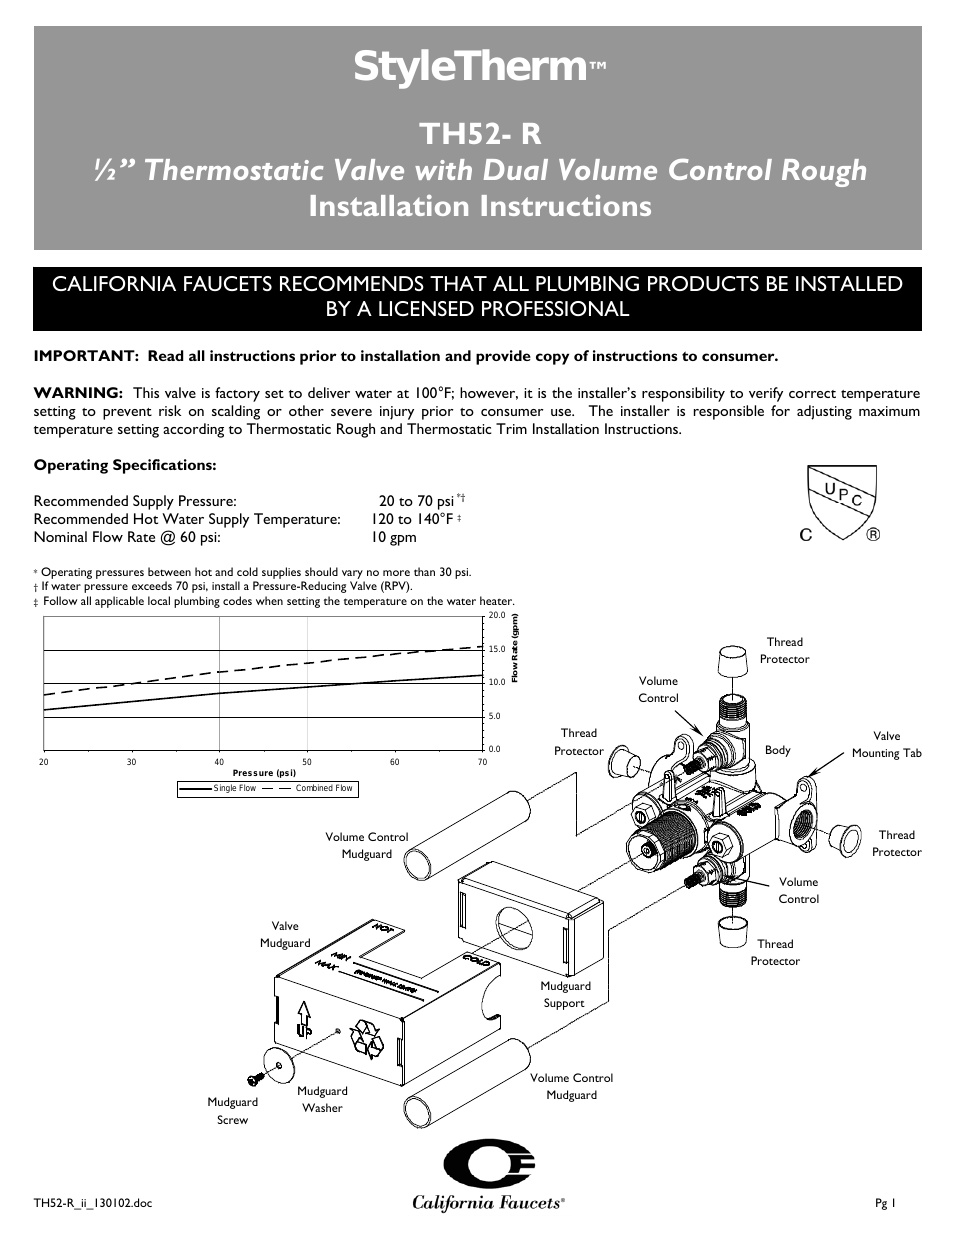 Styletherm 1/ Thermostatic Rough Valve with Dual Integral Volume Controls